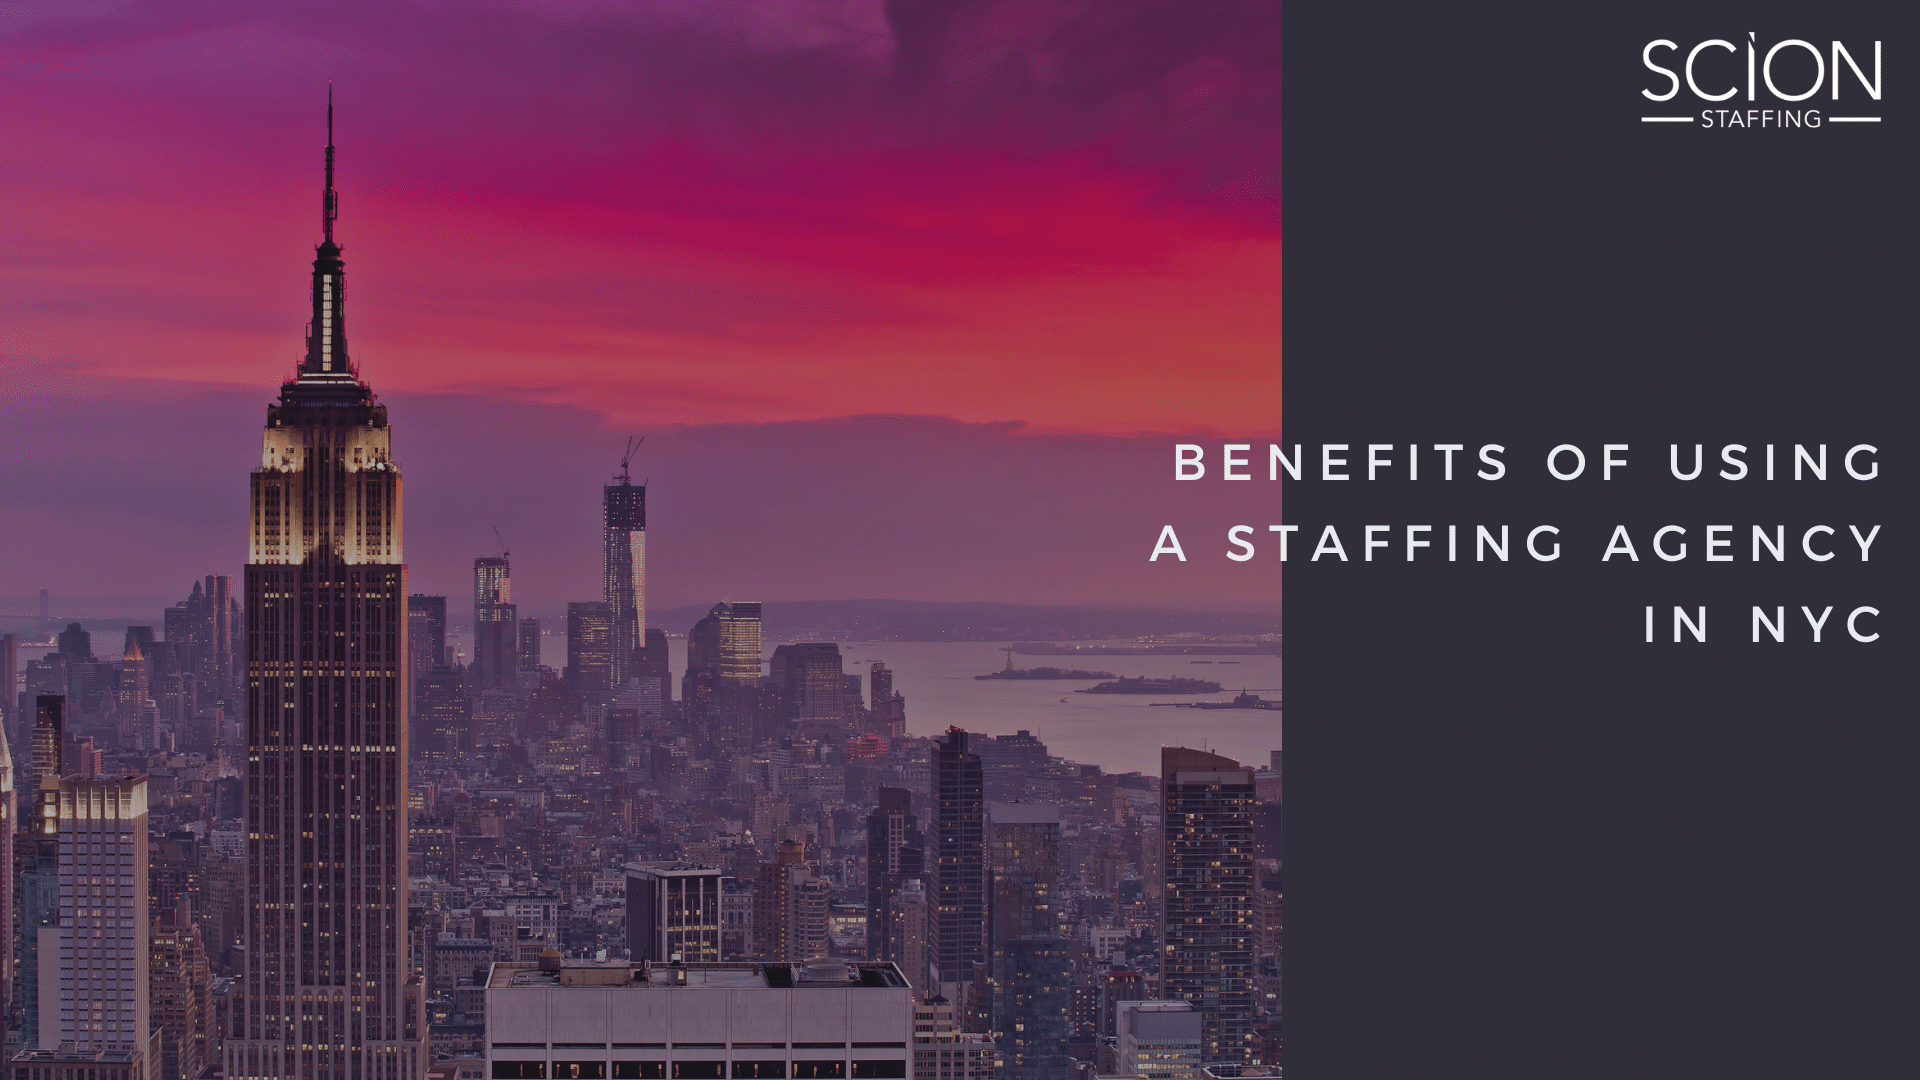 Benefits of Using a Staffing Agency in NYC